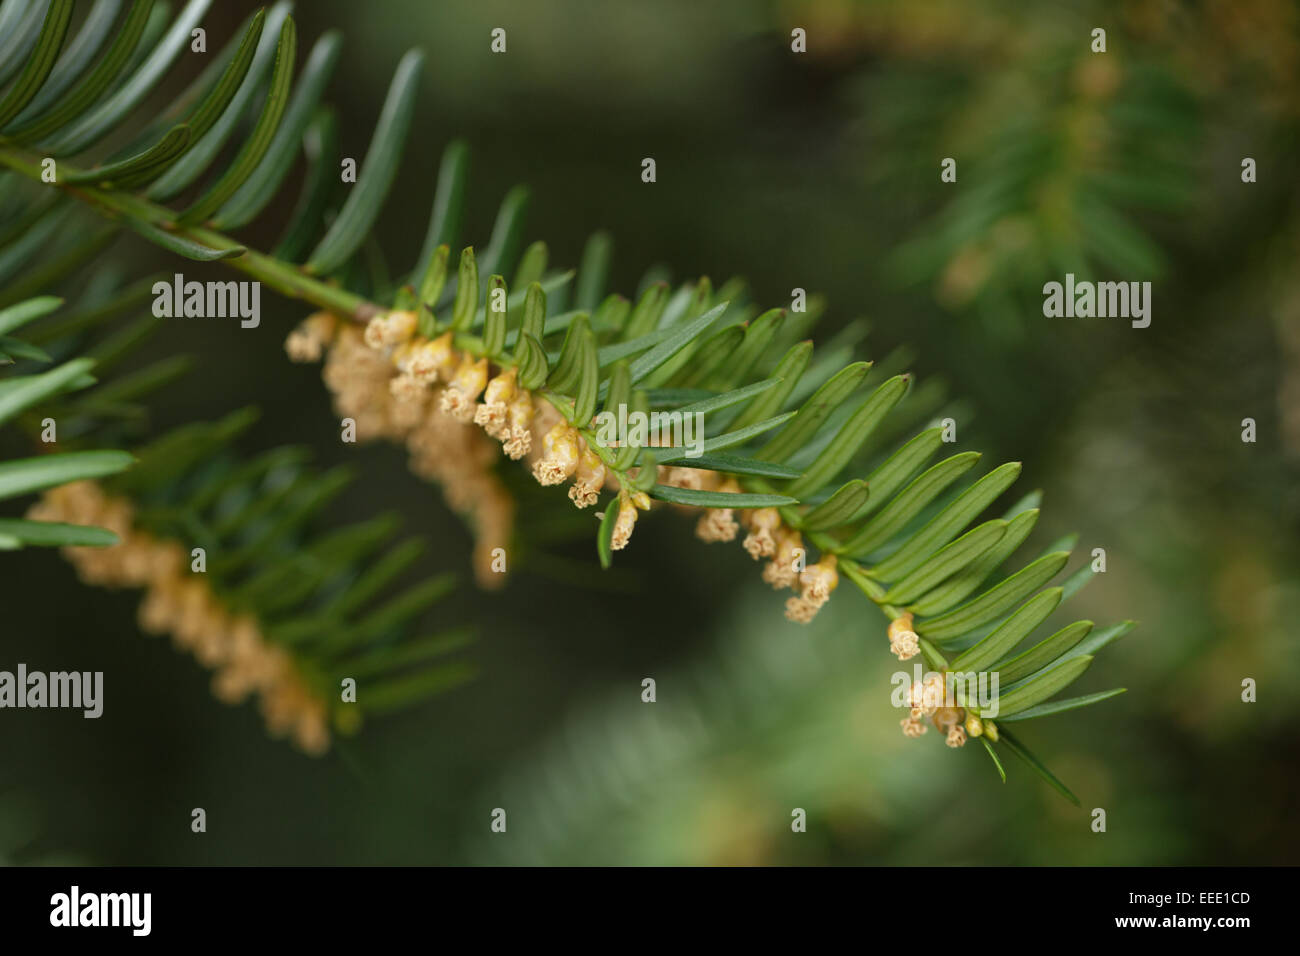 Yew or Taxus baccata green leaves and flowers, close up Stock Photo